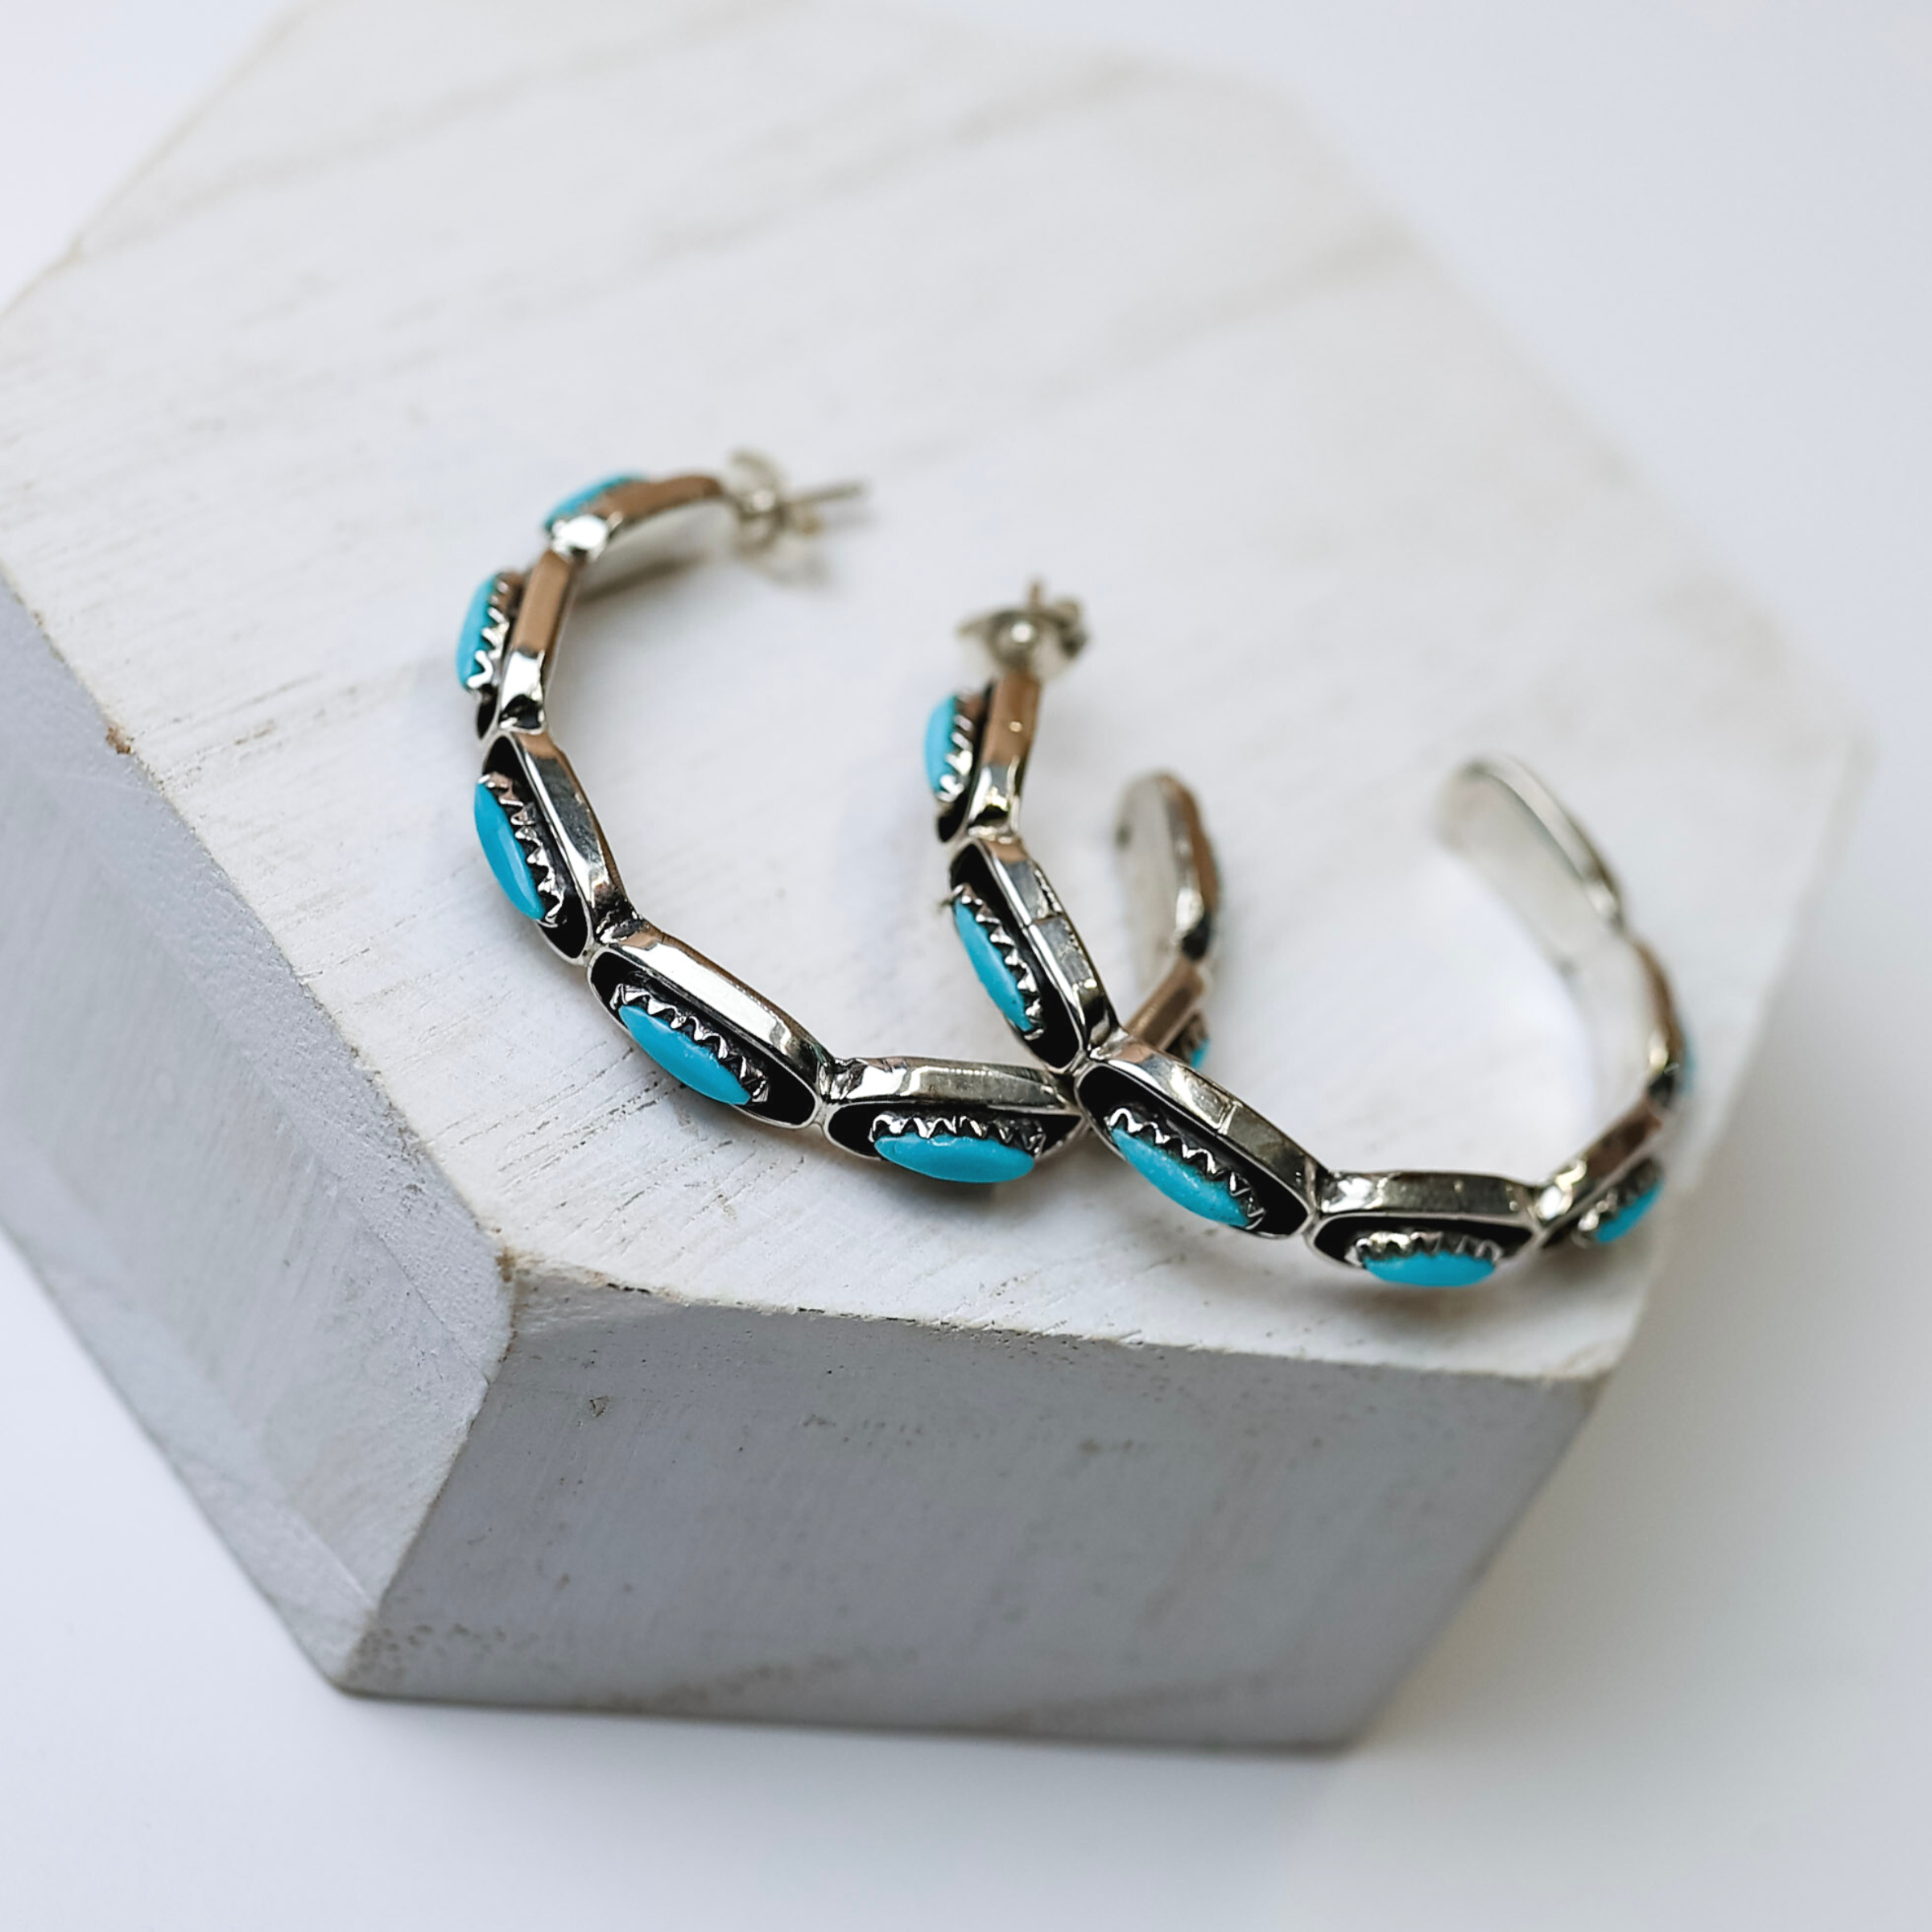 Navajo | Navajo Handmade Genuine Sterling Silver Hoops with Turquoise Stones - Giddy Up Glamour Boutique